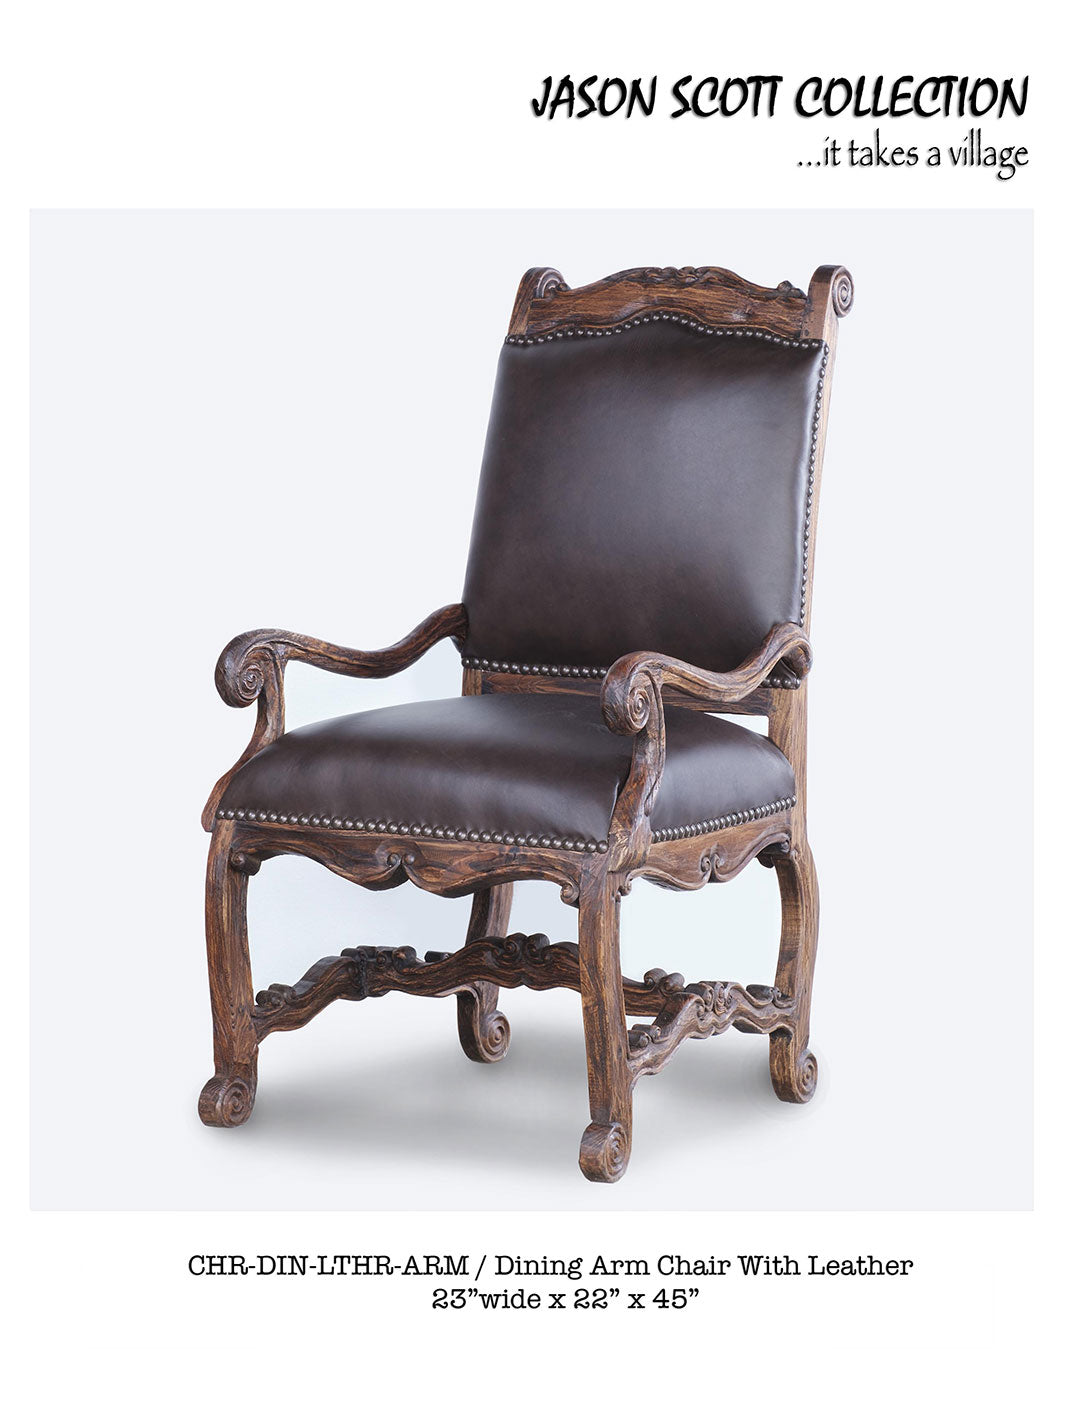 Jason Scott Dining Arm Chair with Leather